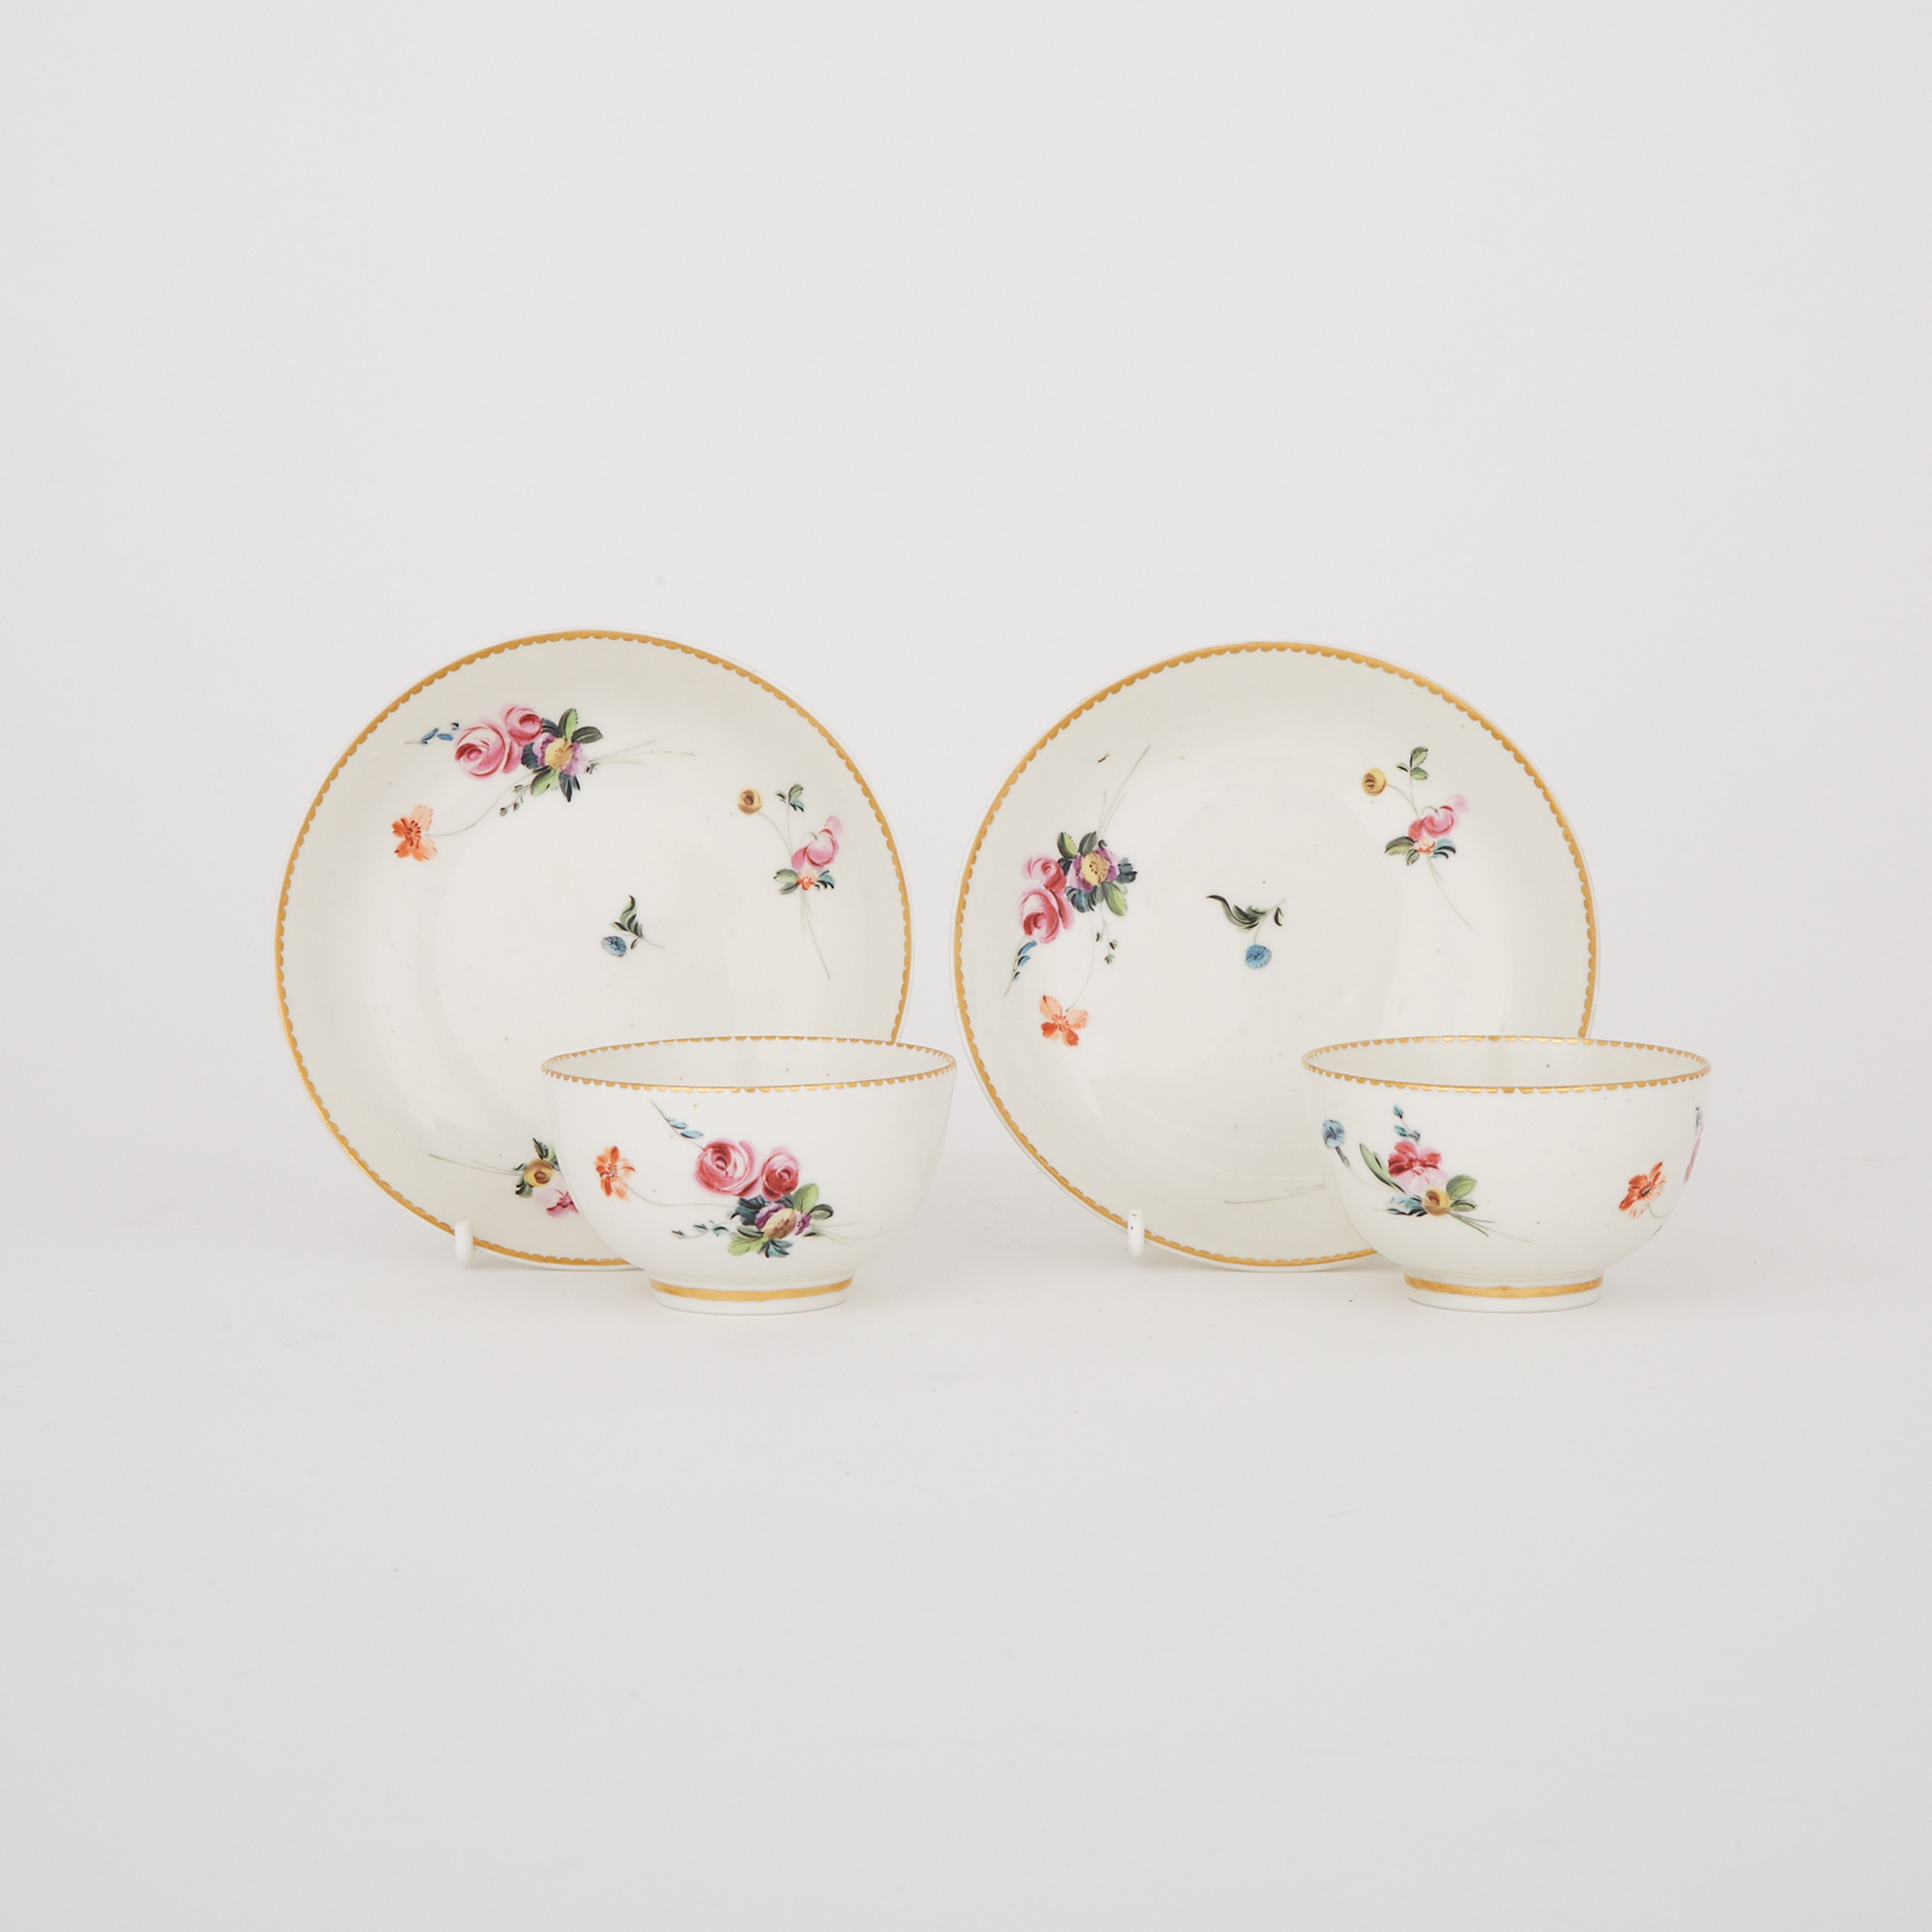 Pair of Derby Floral Painted Tea Bowls and Saucers, c.1780